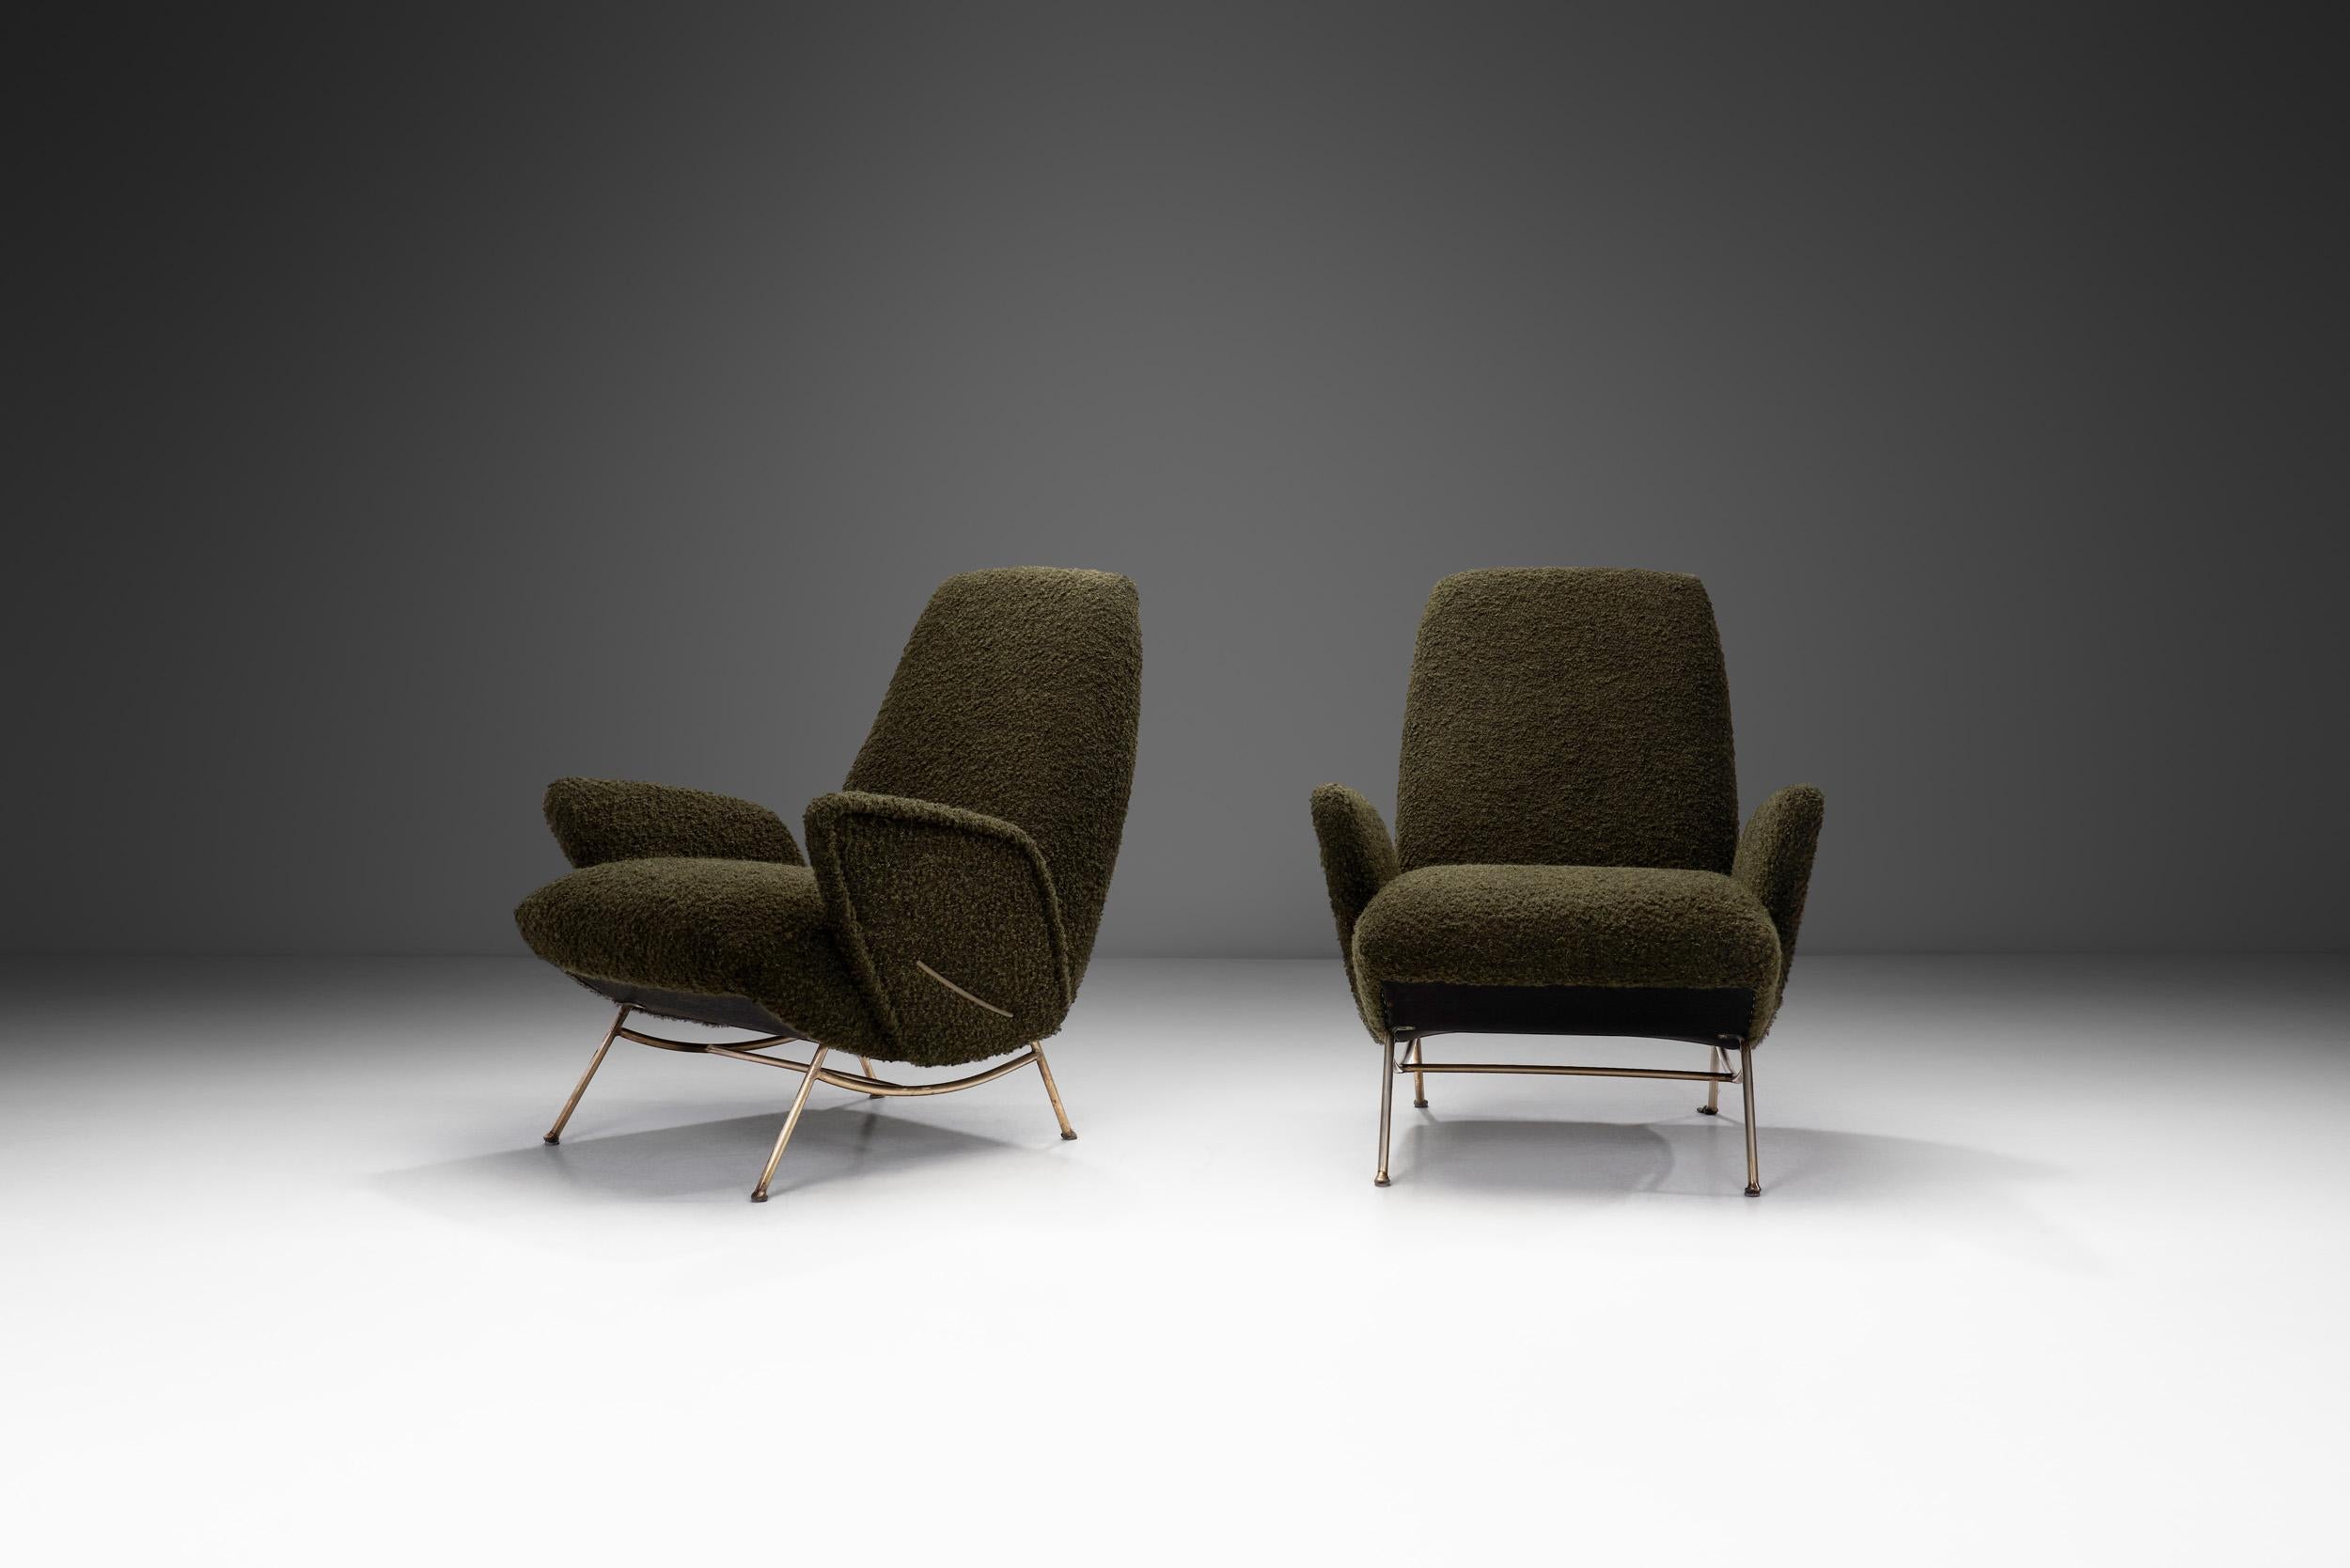 Italian Pair of Midcentury Lounge Chairs with Metal Legs by Nino Zoncada, Italy, 1950s For Sale